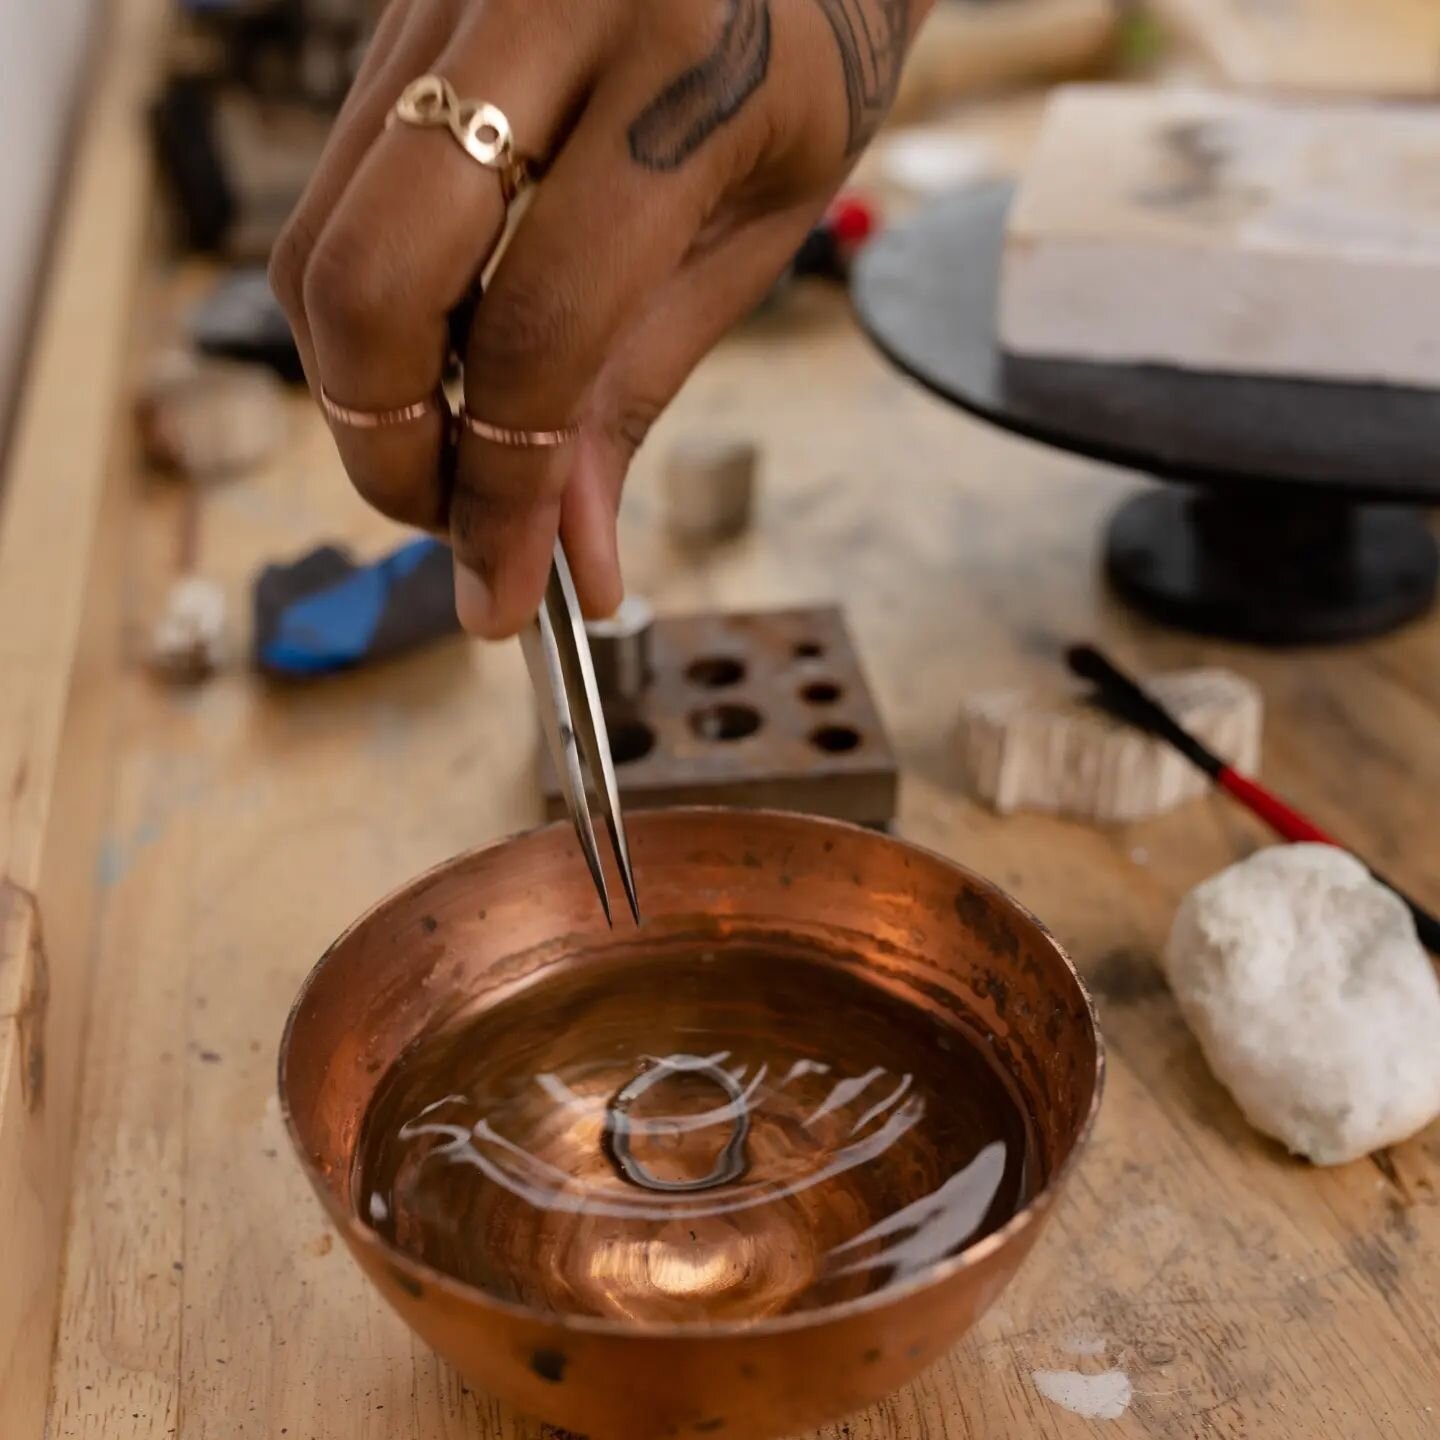 Good Morning Instagram 🤍🕊
.
.
Have you ever wondered how silver rings are made? Are you looking to make your own? As of May 13th, we will be running a make your own silver ring class.
In this class you will learn;
- Saw piercing
- Soldering
- Filin